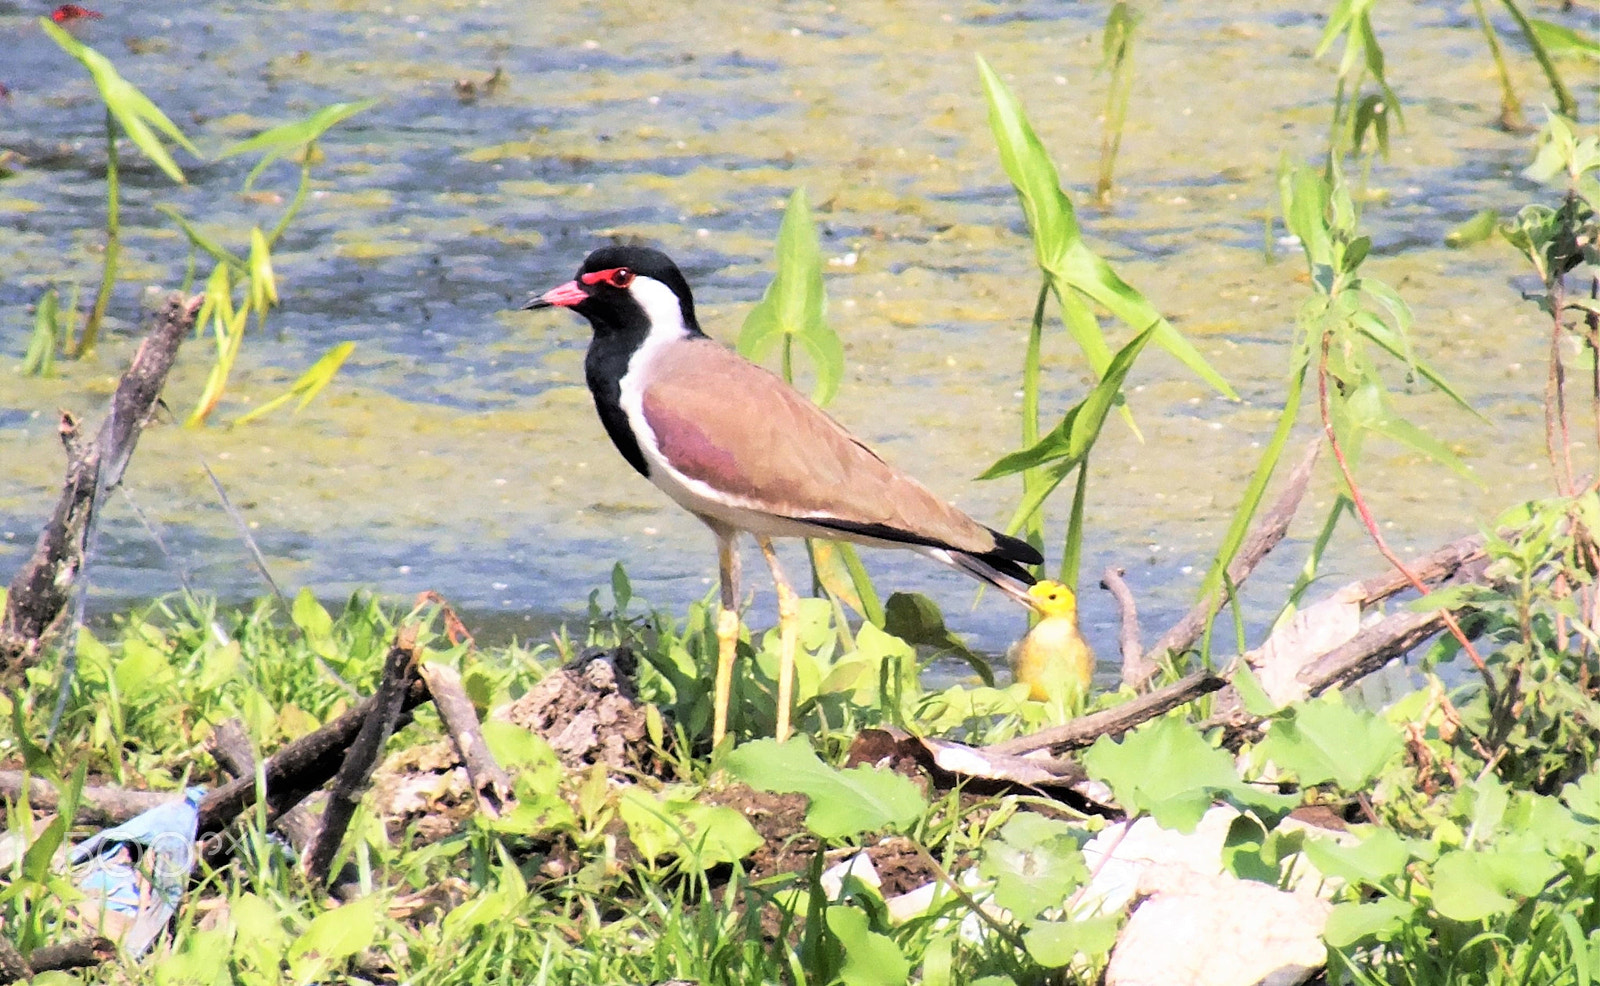 Fujifilm FinePix HS28EXR sample photo. Red wattled lapwing bird with a chick behind photography